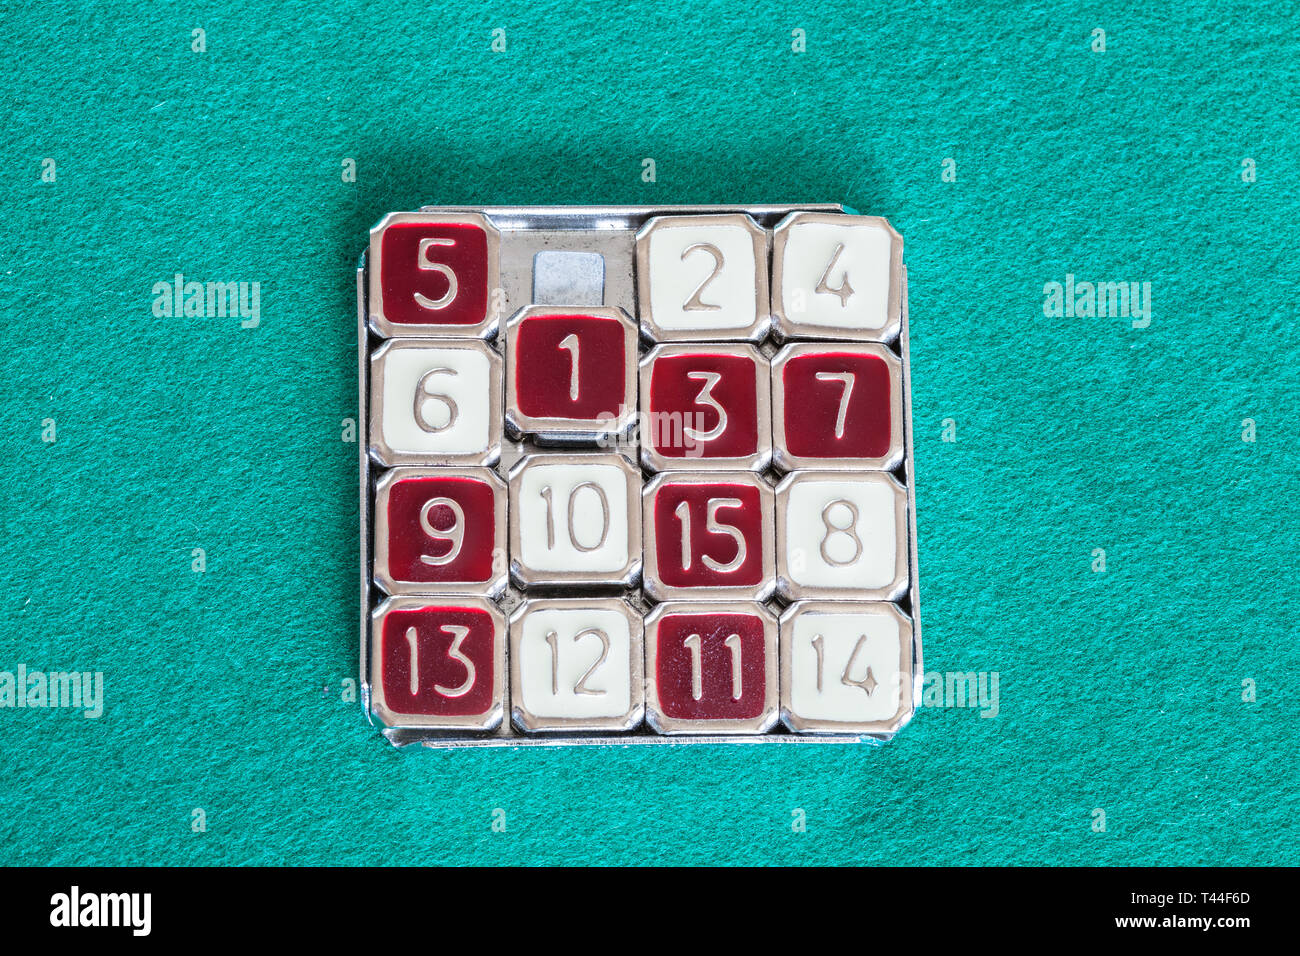 top view of 15-puzzle (magic 15) sliding puzzle game on green baize table Stock Photo